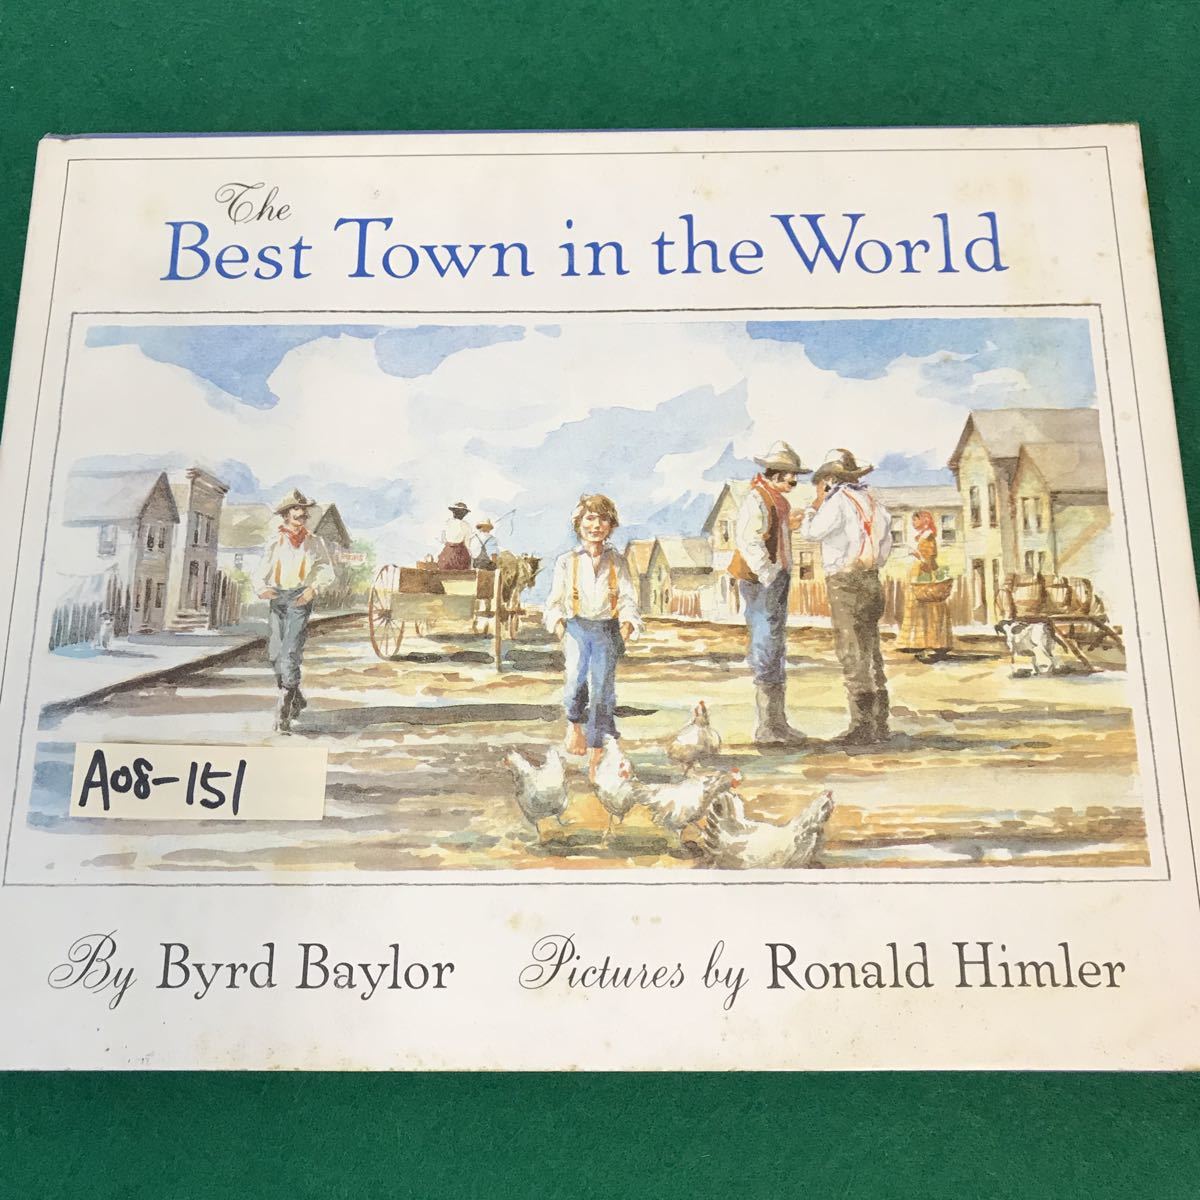 A08-151 洋書・絵本。Best Town in the World 著者・Byrd Baylor 絵・Ronald Himler 1983年発行。